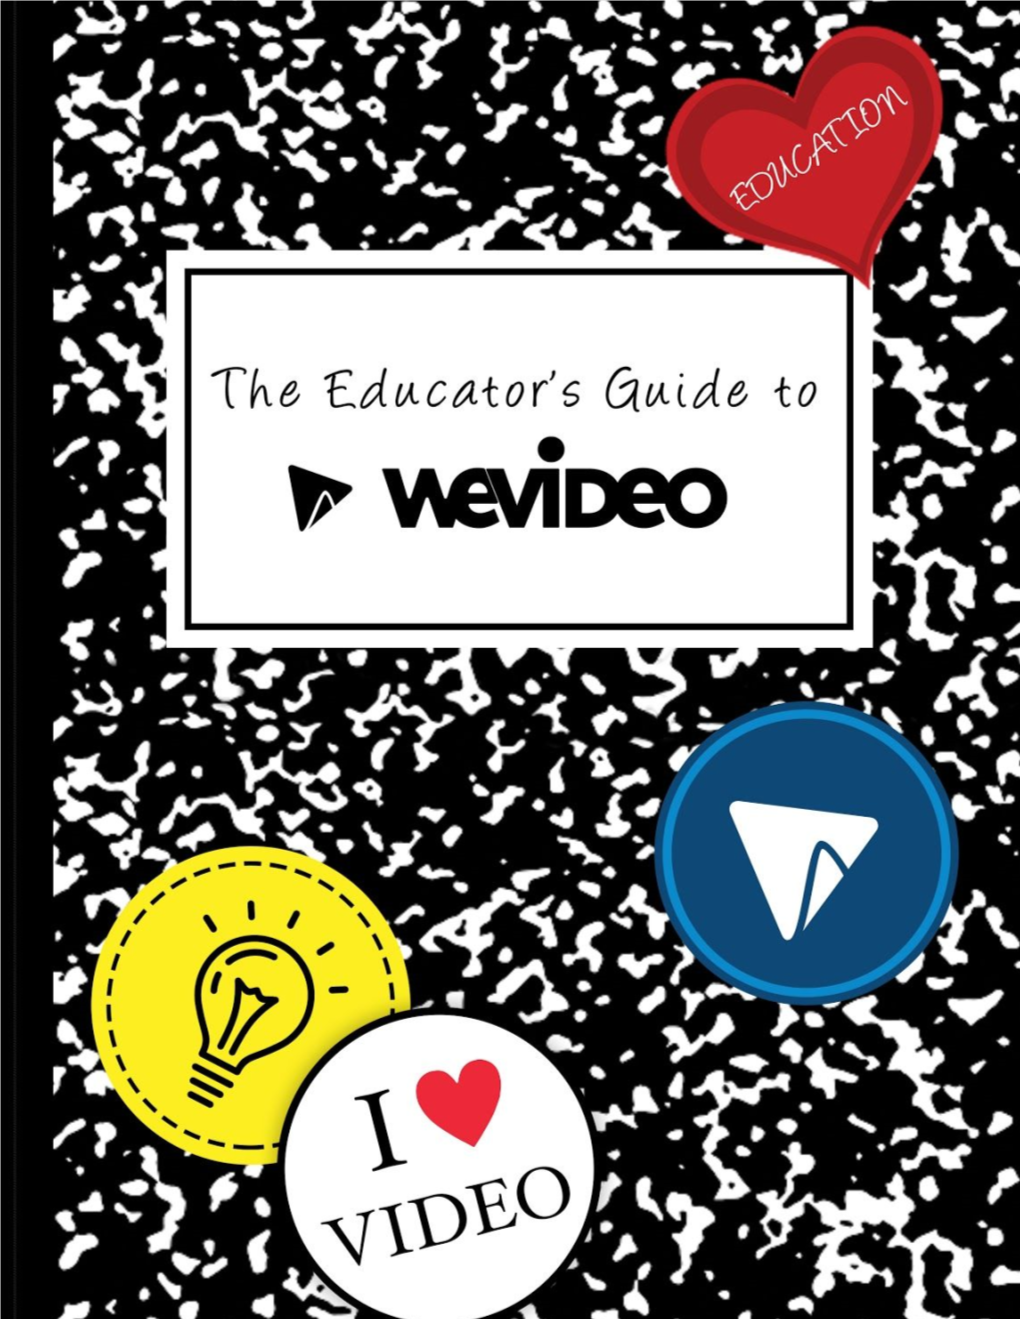 The Educator's Guide to Wevideo